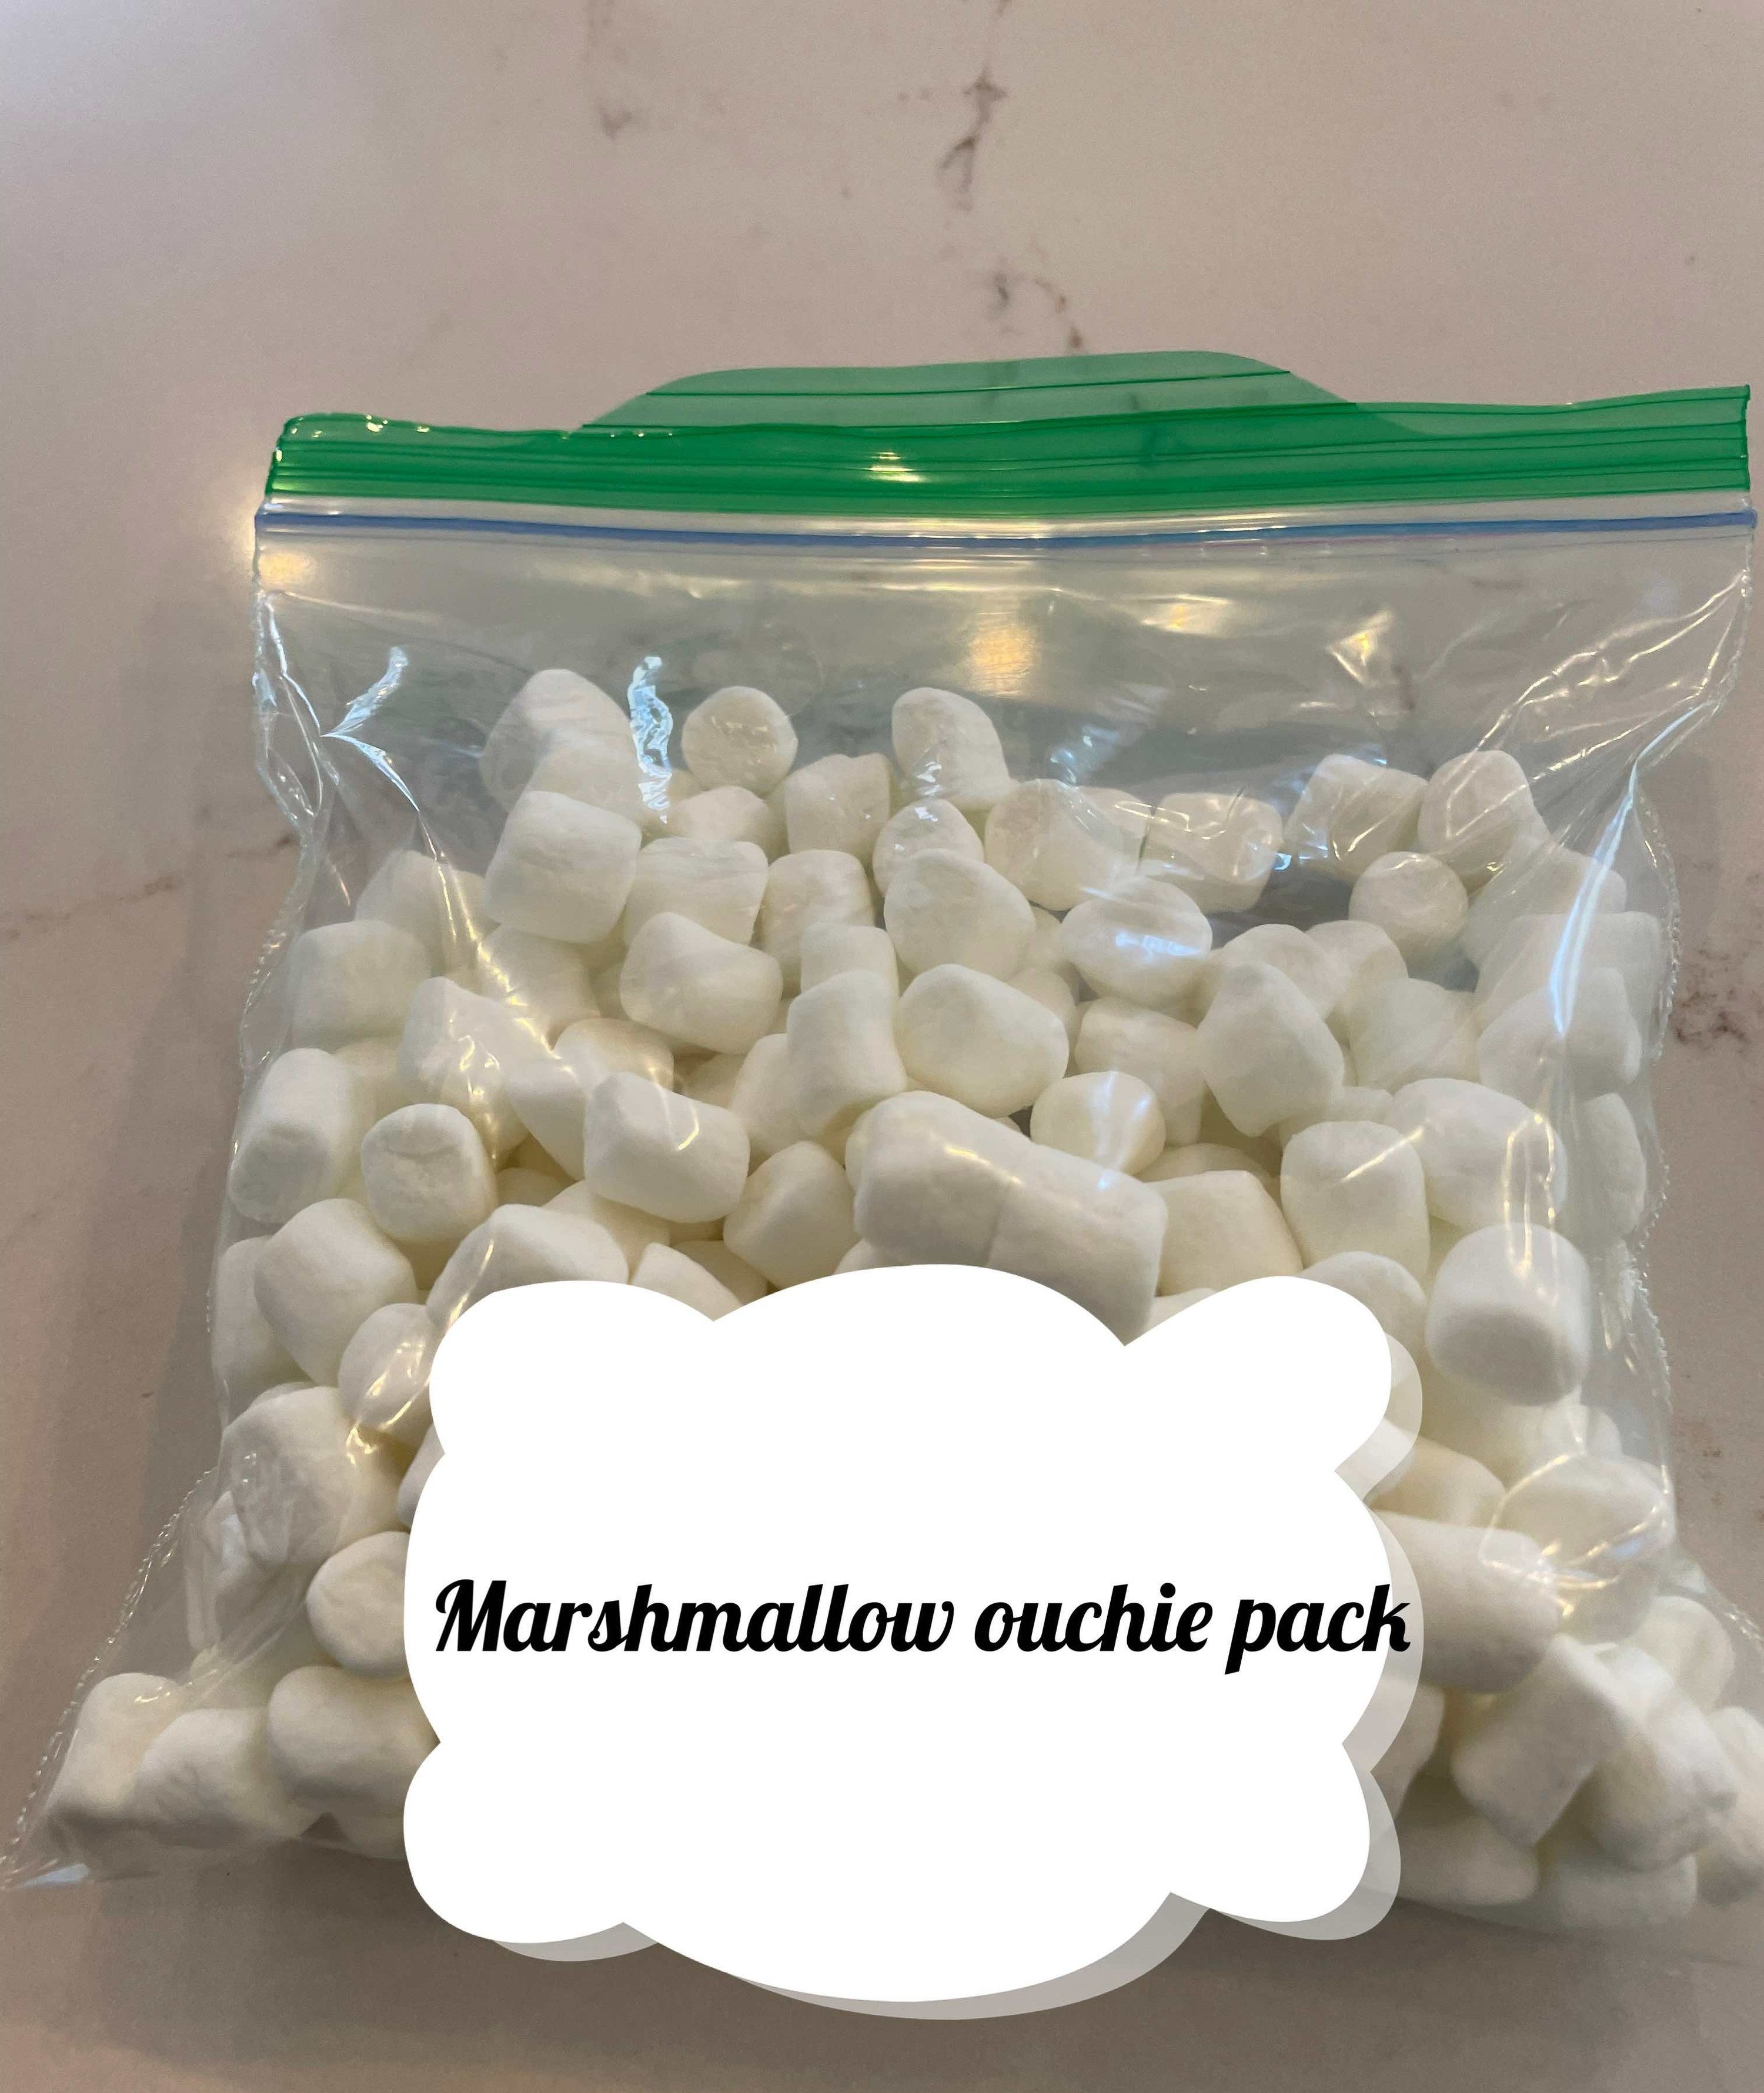 A photo of frozen marshmallows in a Ziploc bag